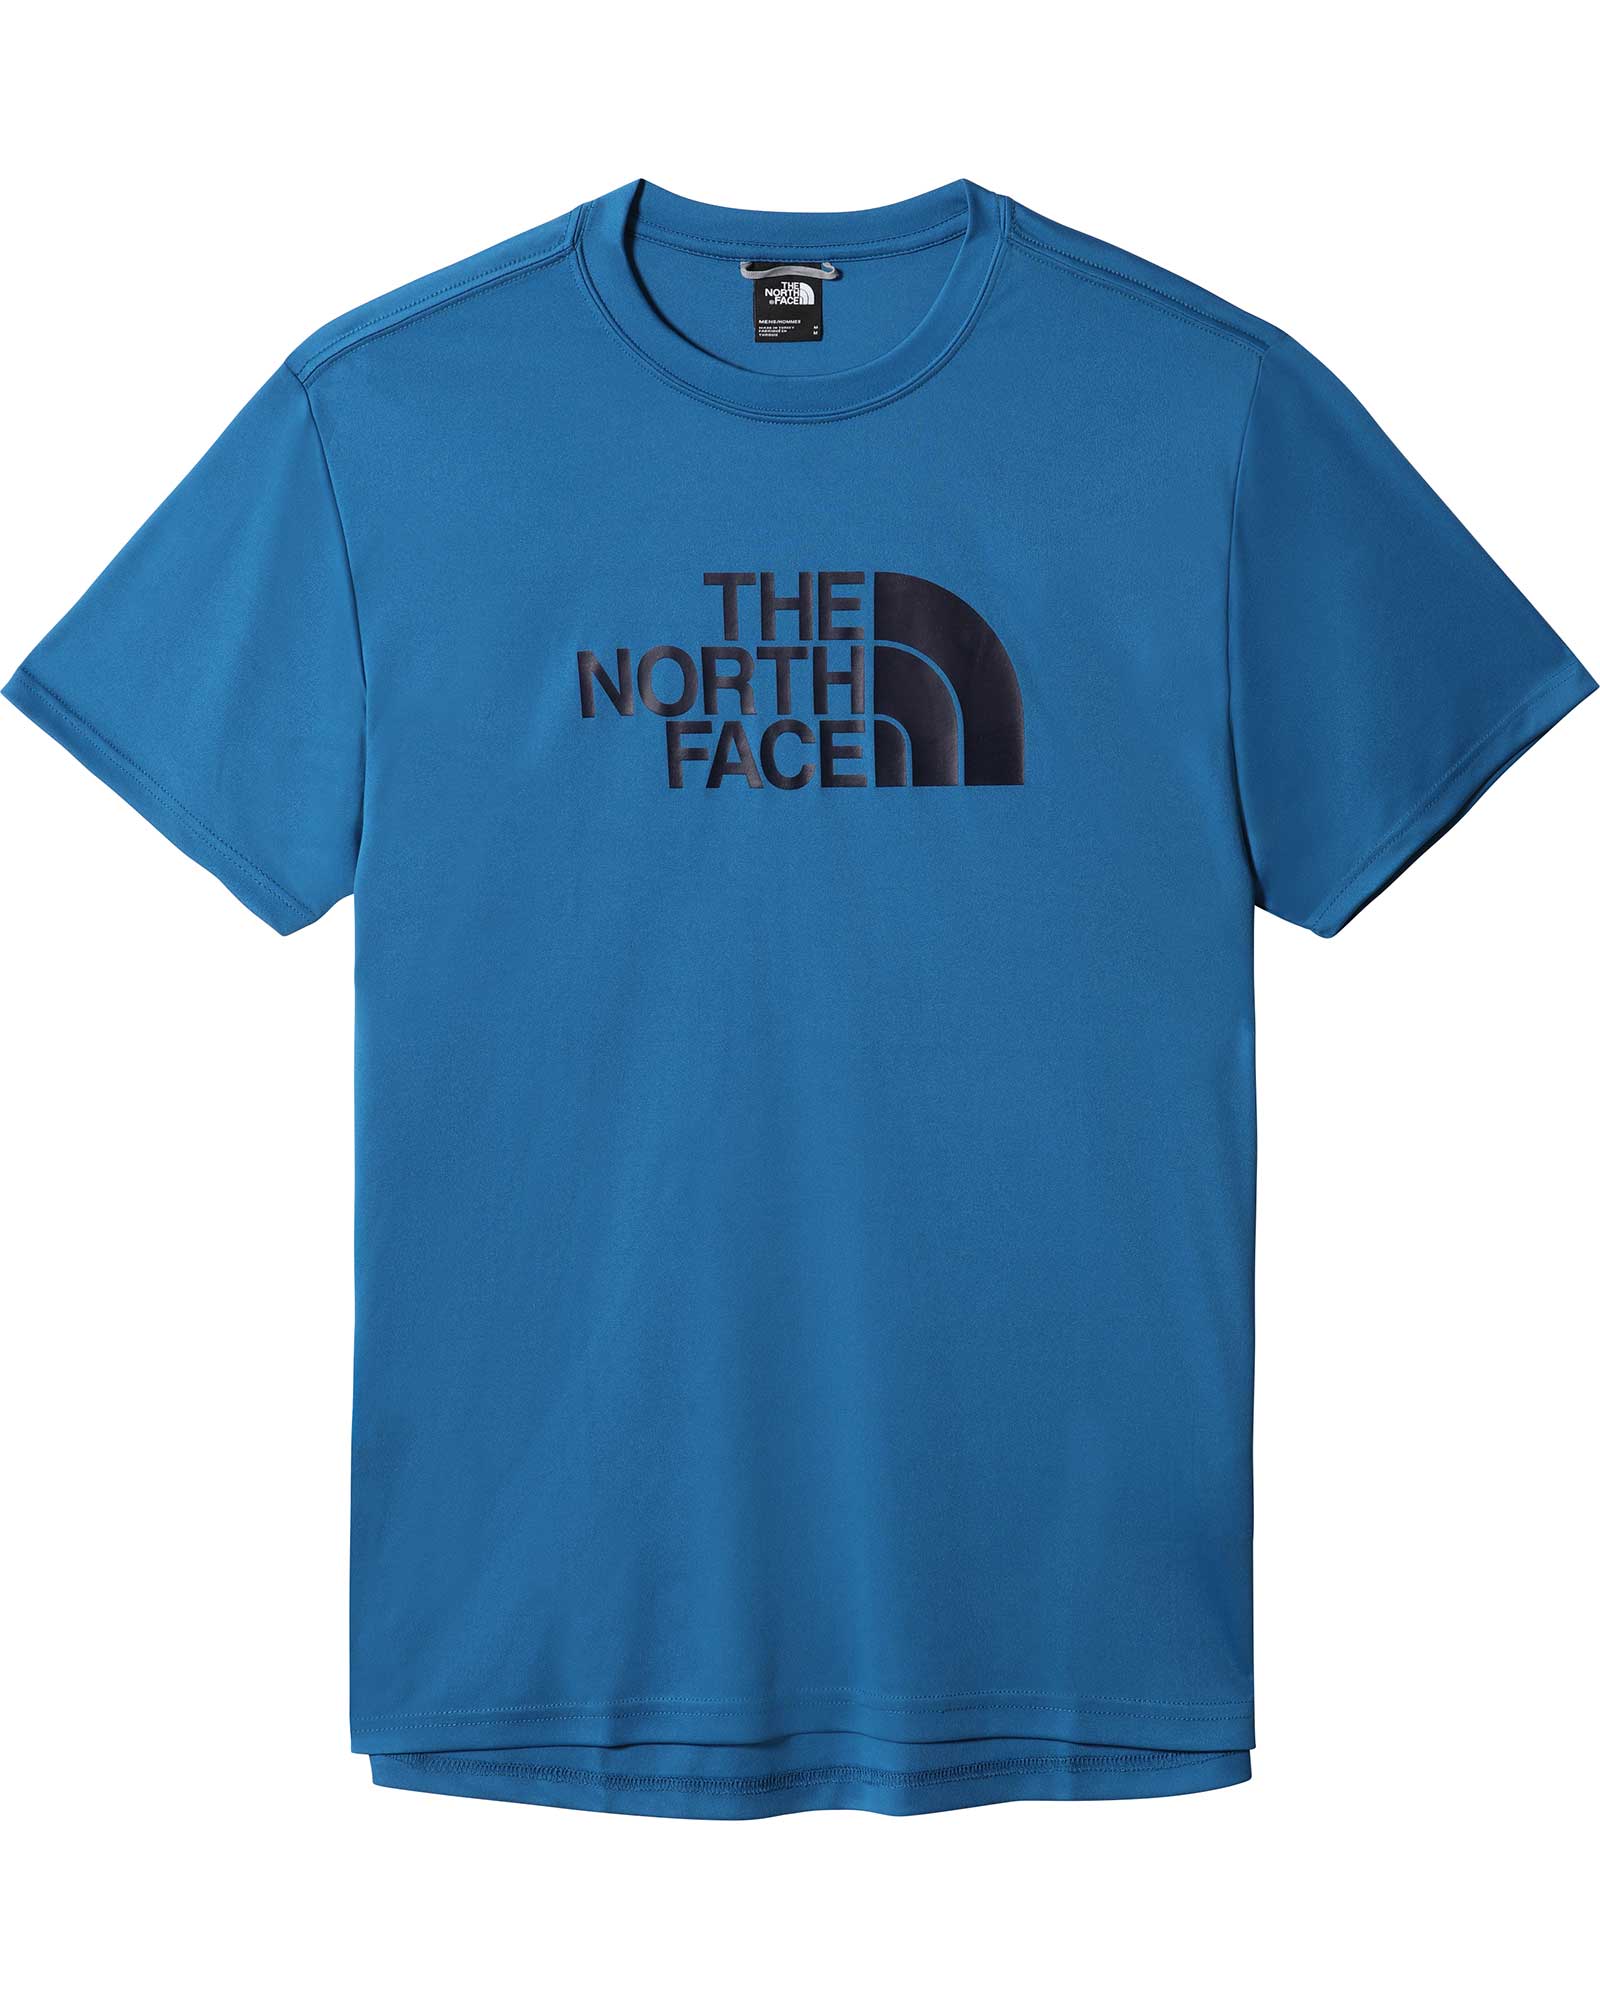 The North Face Reaxion Easy Men’s T Shirt - Banff Blue M